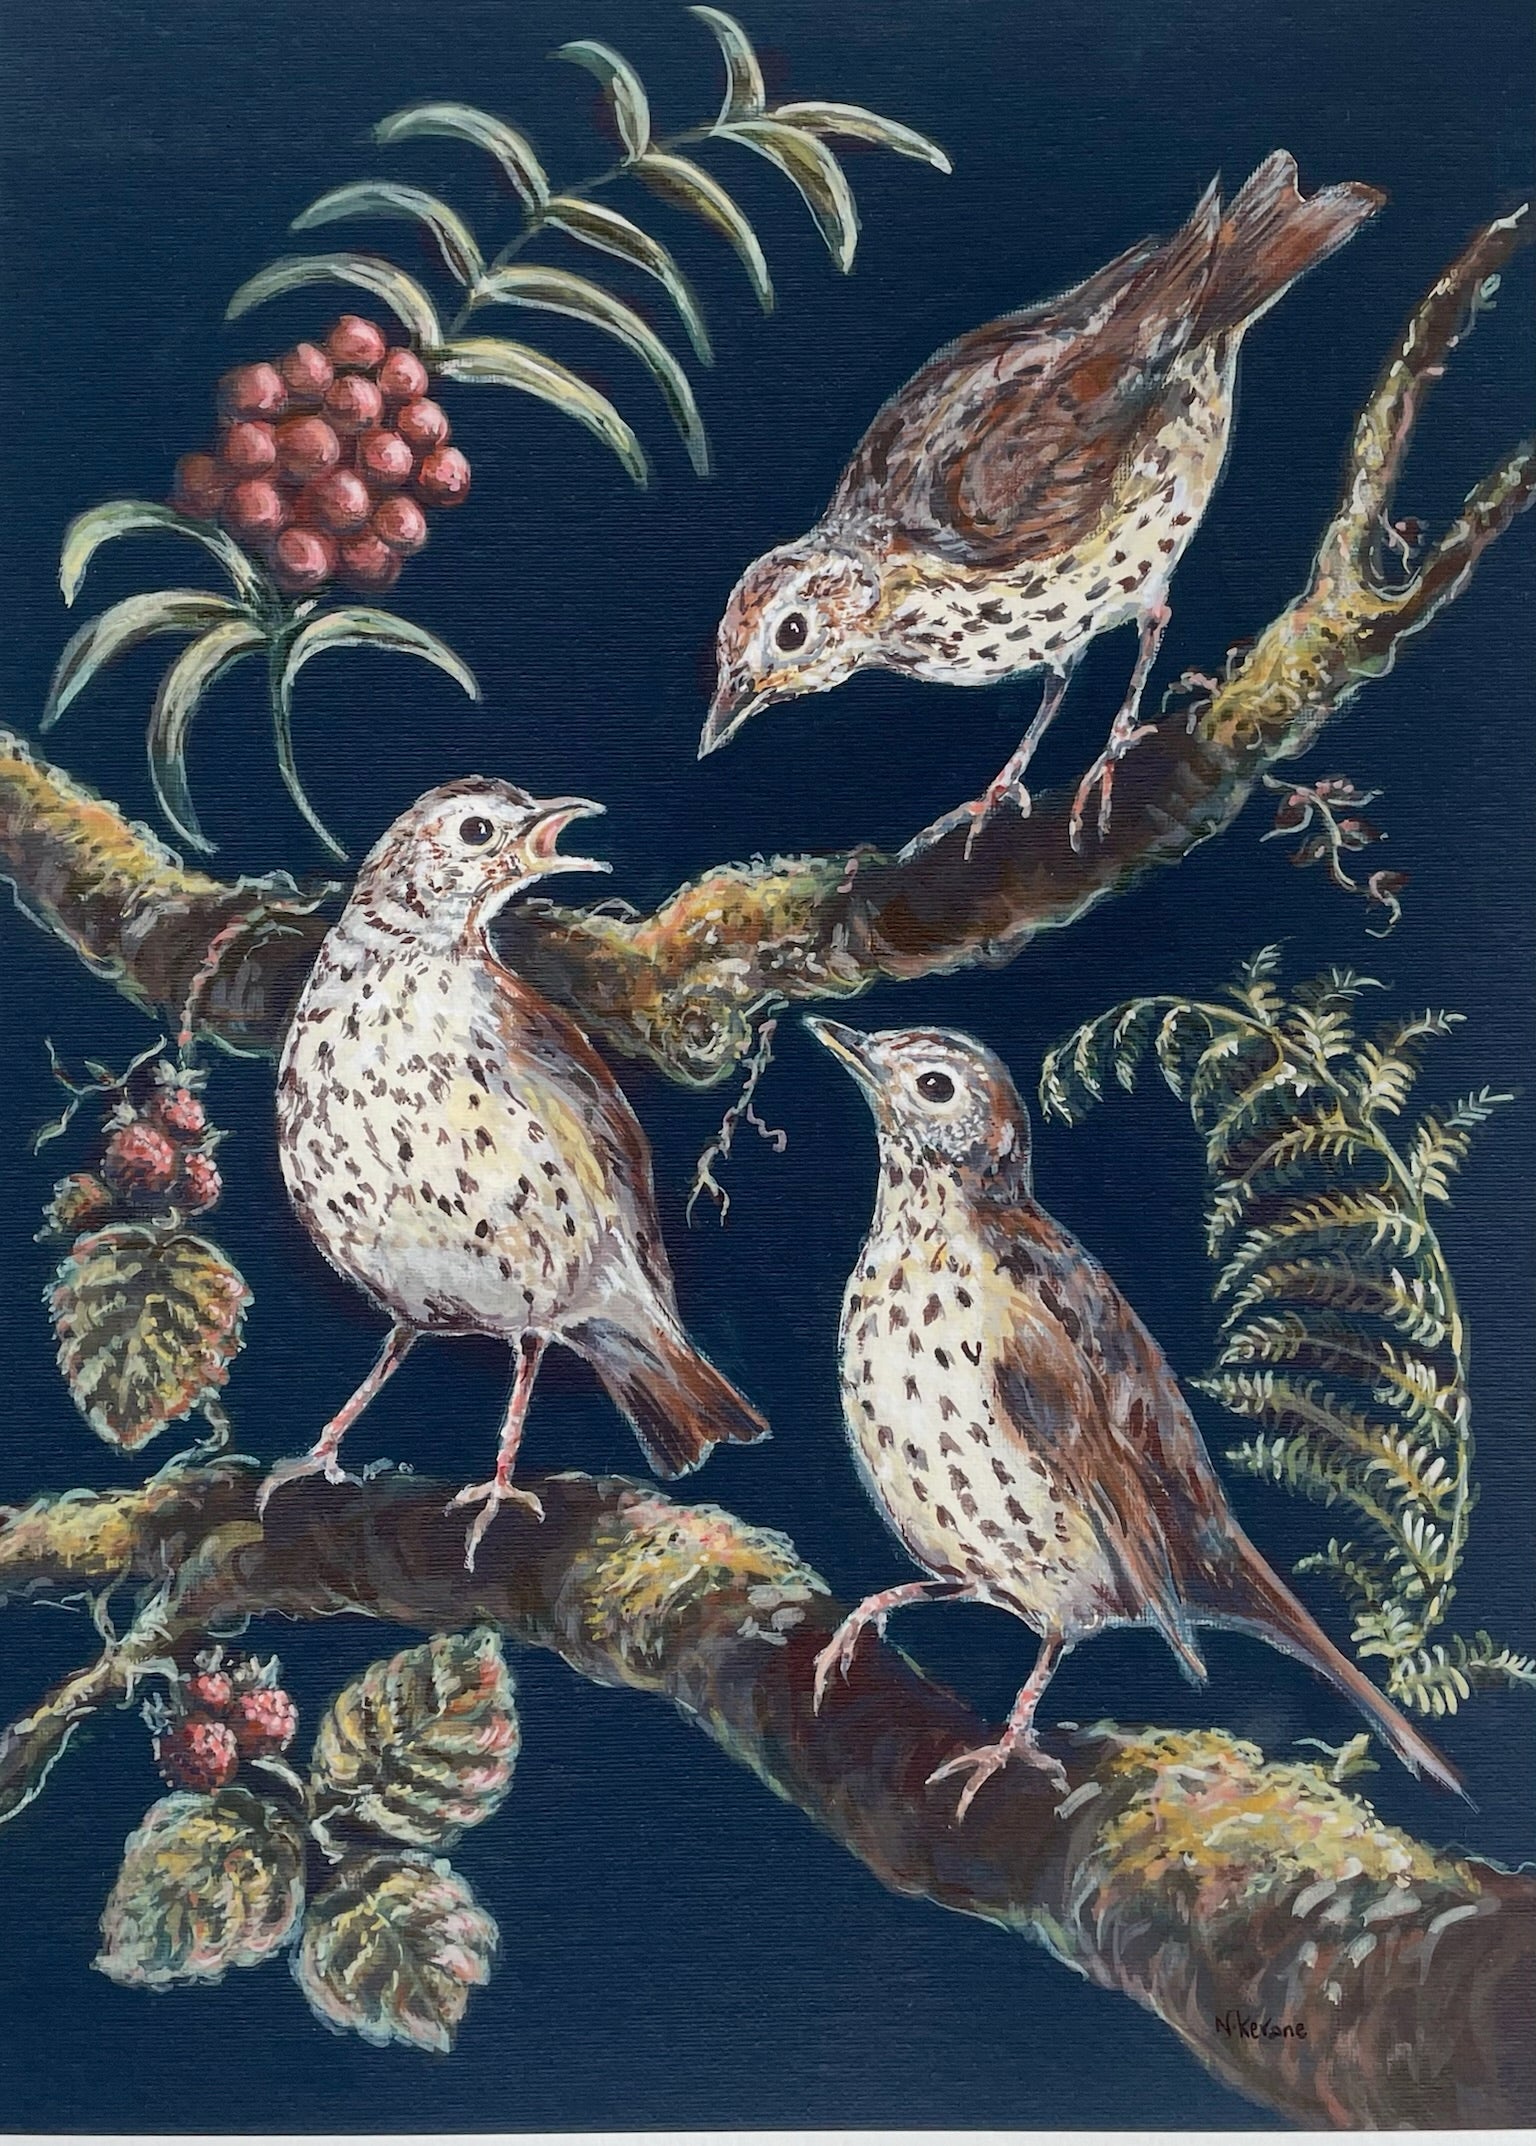 This fine art giclee print shows three song thrushes in a native hedgerow. The background colour is a very pleasant dark midnight blue.